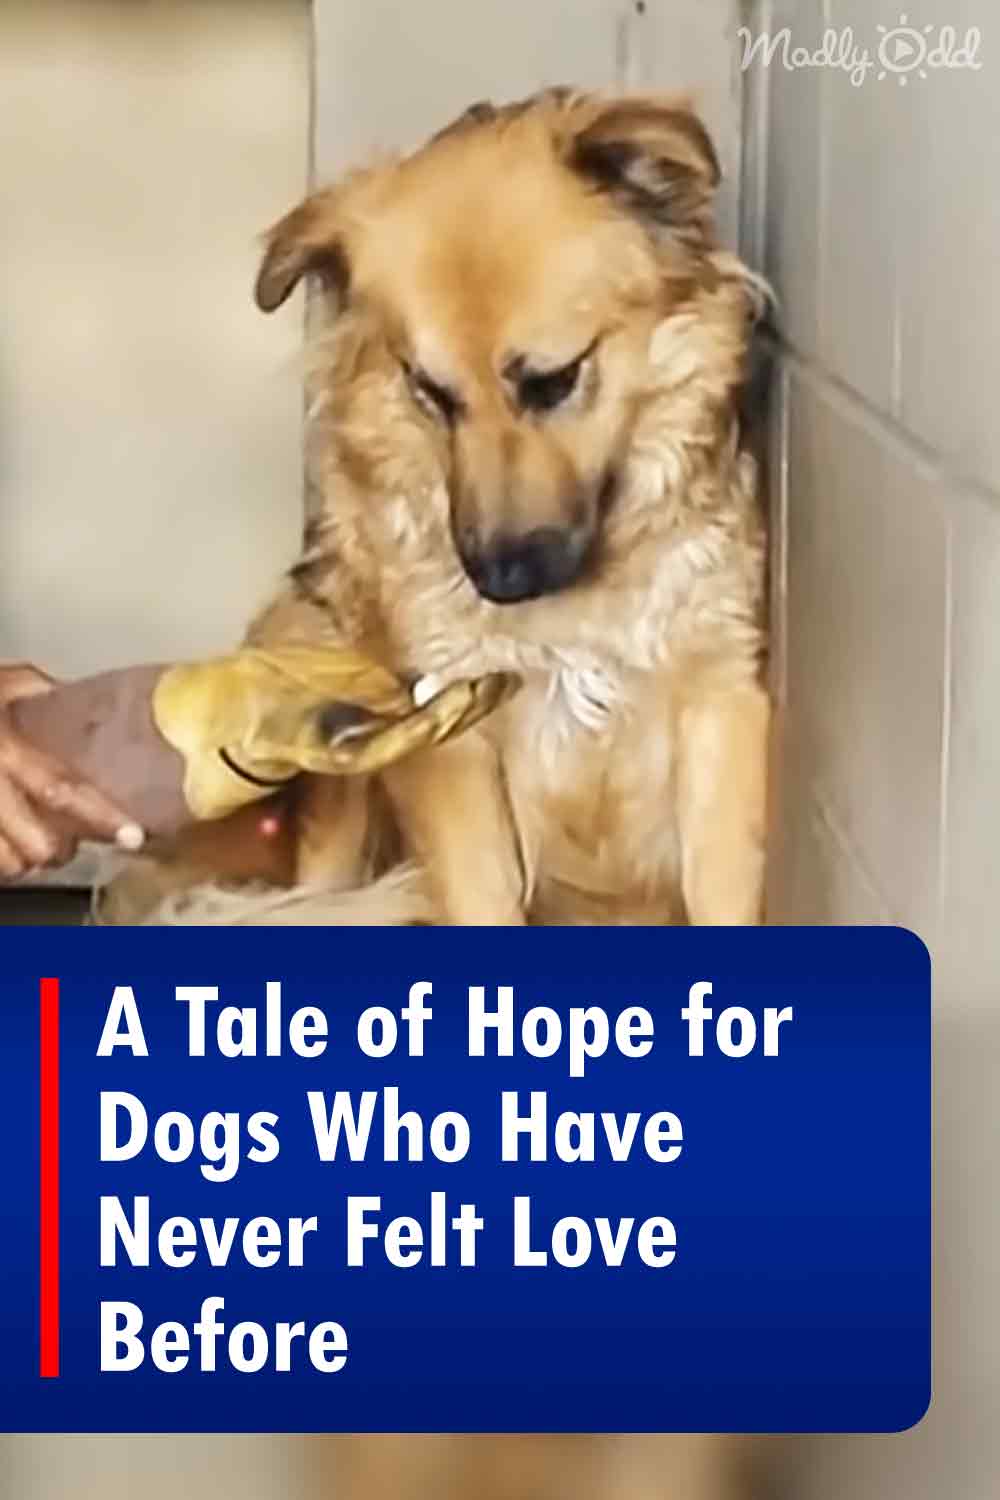 A Tale of Hope for Dogs Who Have Never Felt Love Before